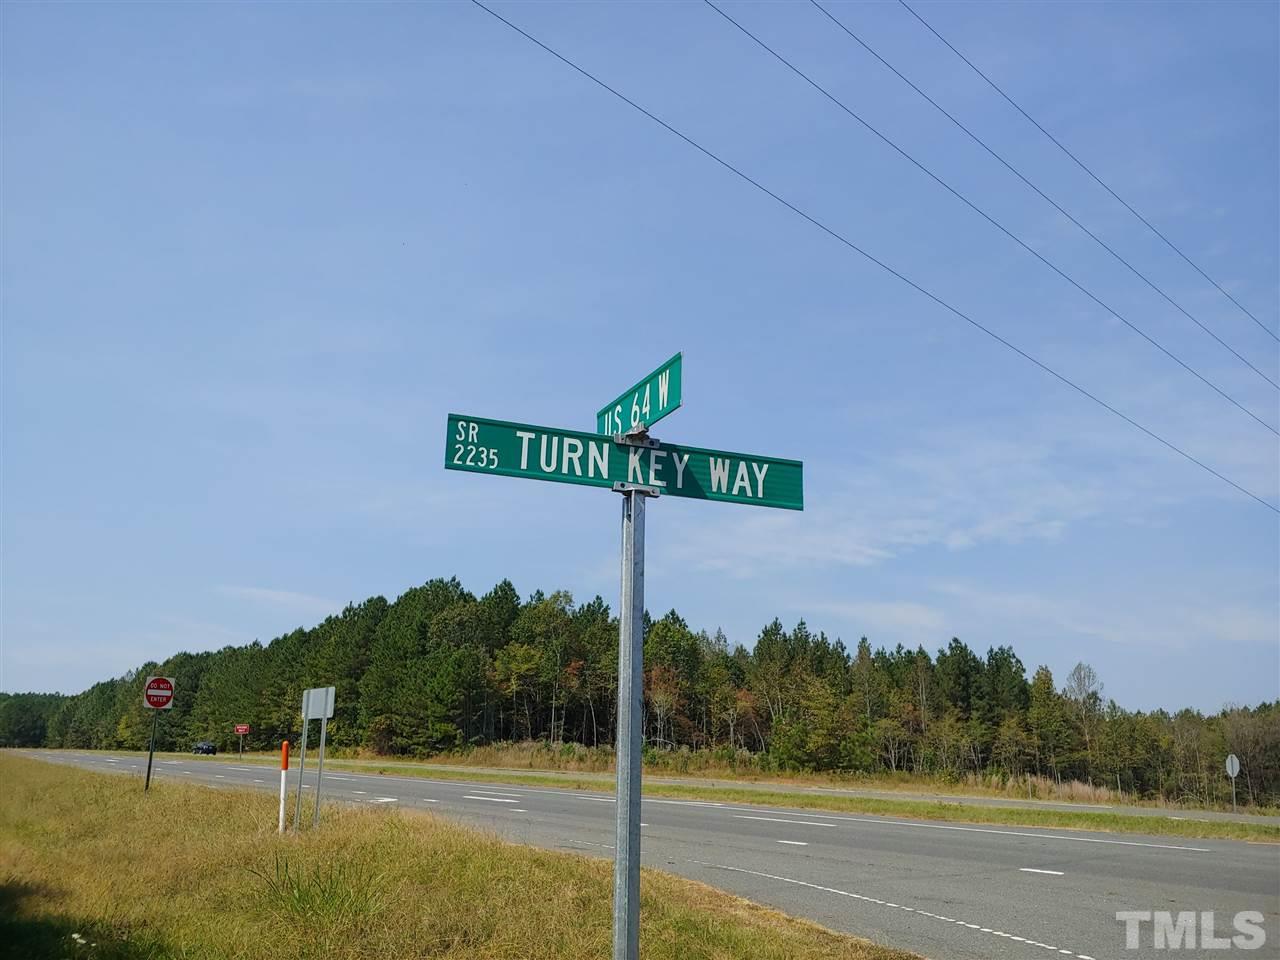 Intersection of US 64 West and Turn Key Way (Gravel Rd)